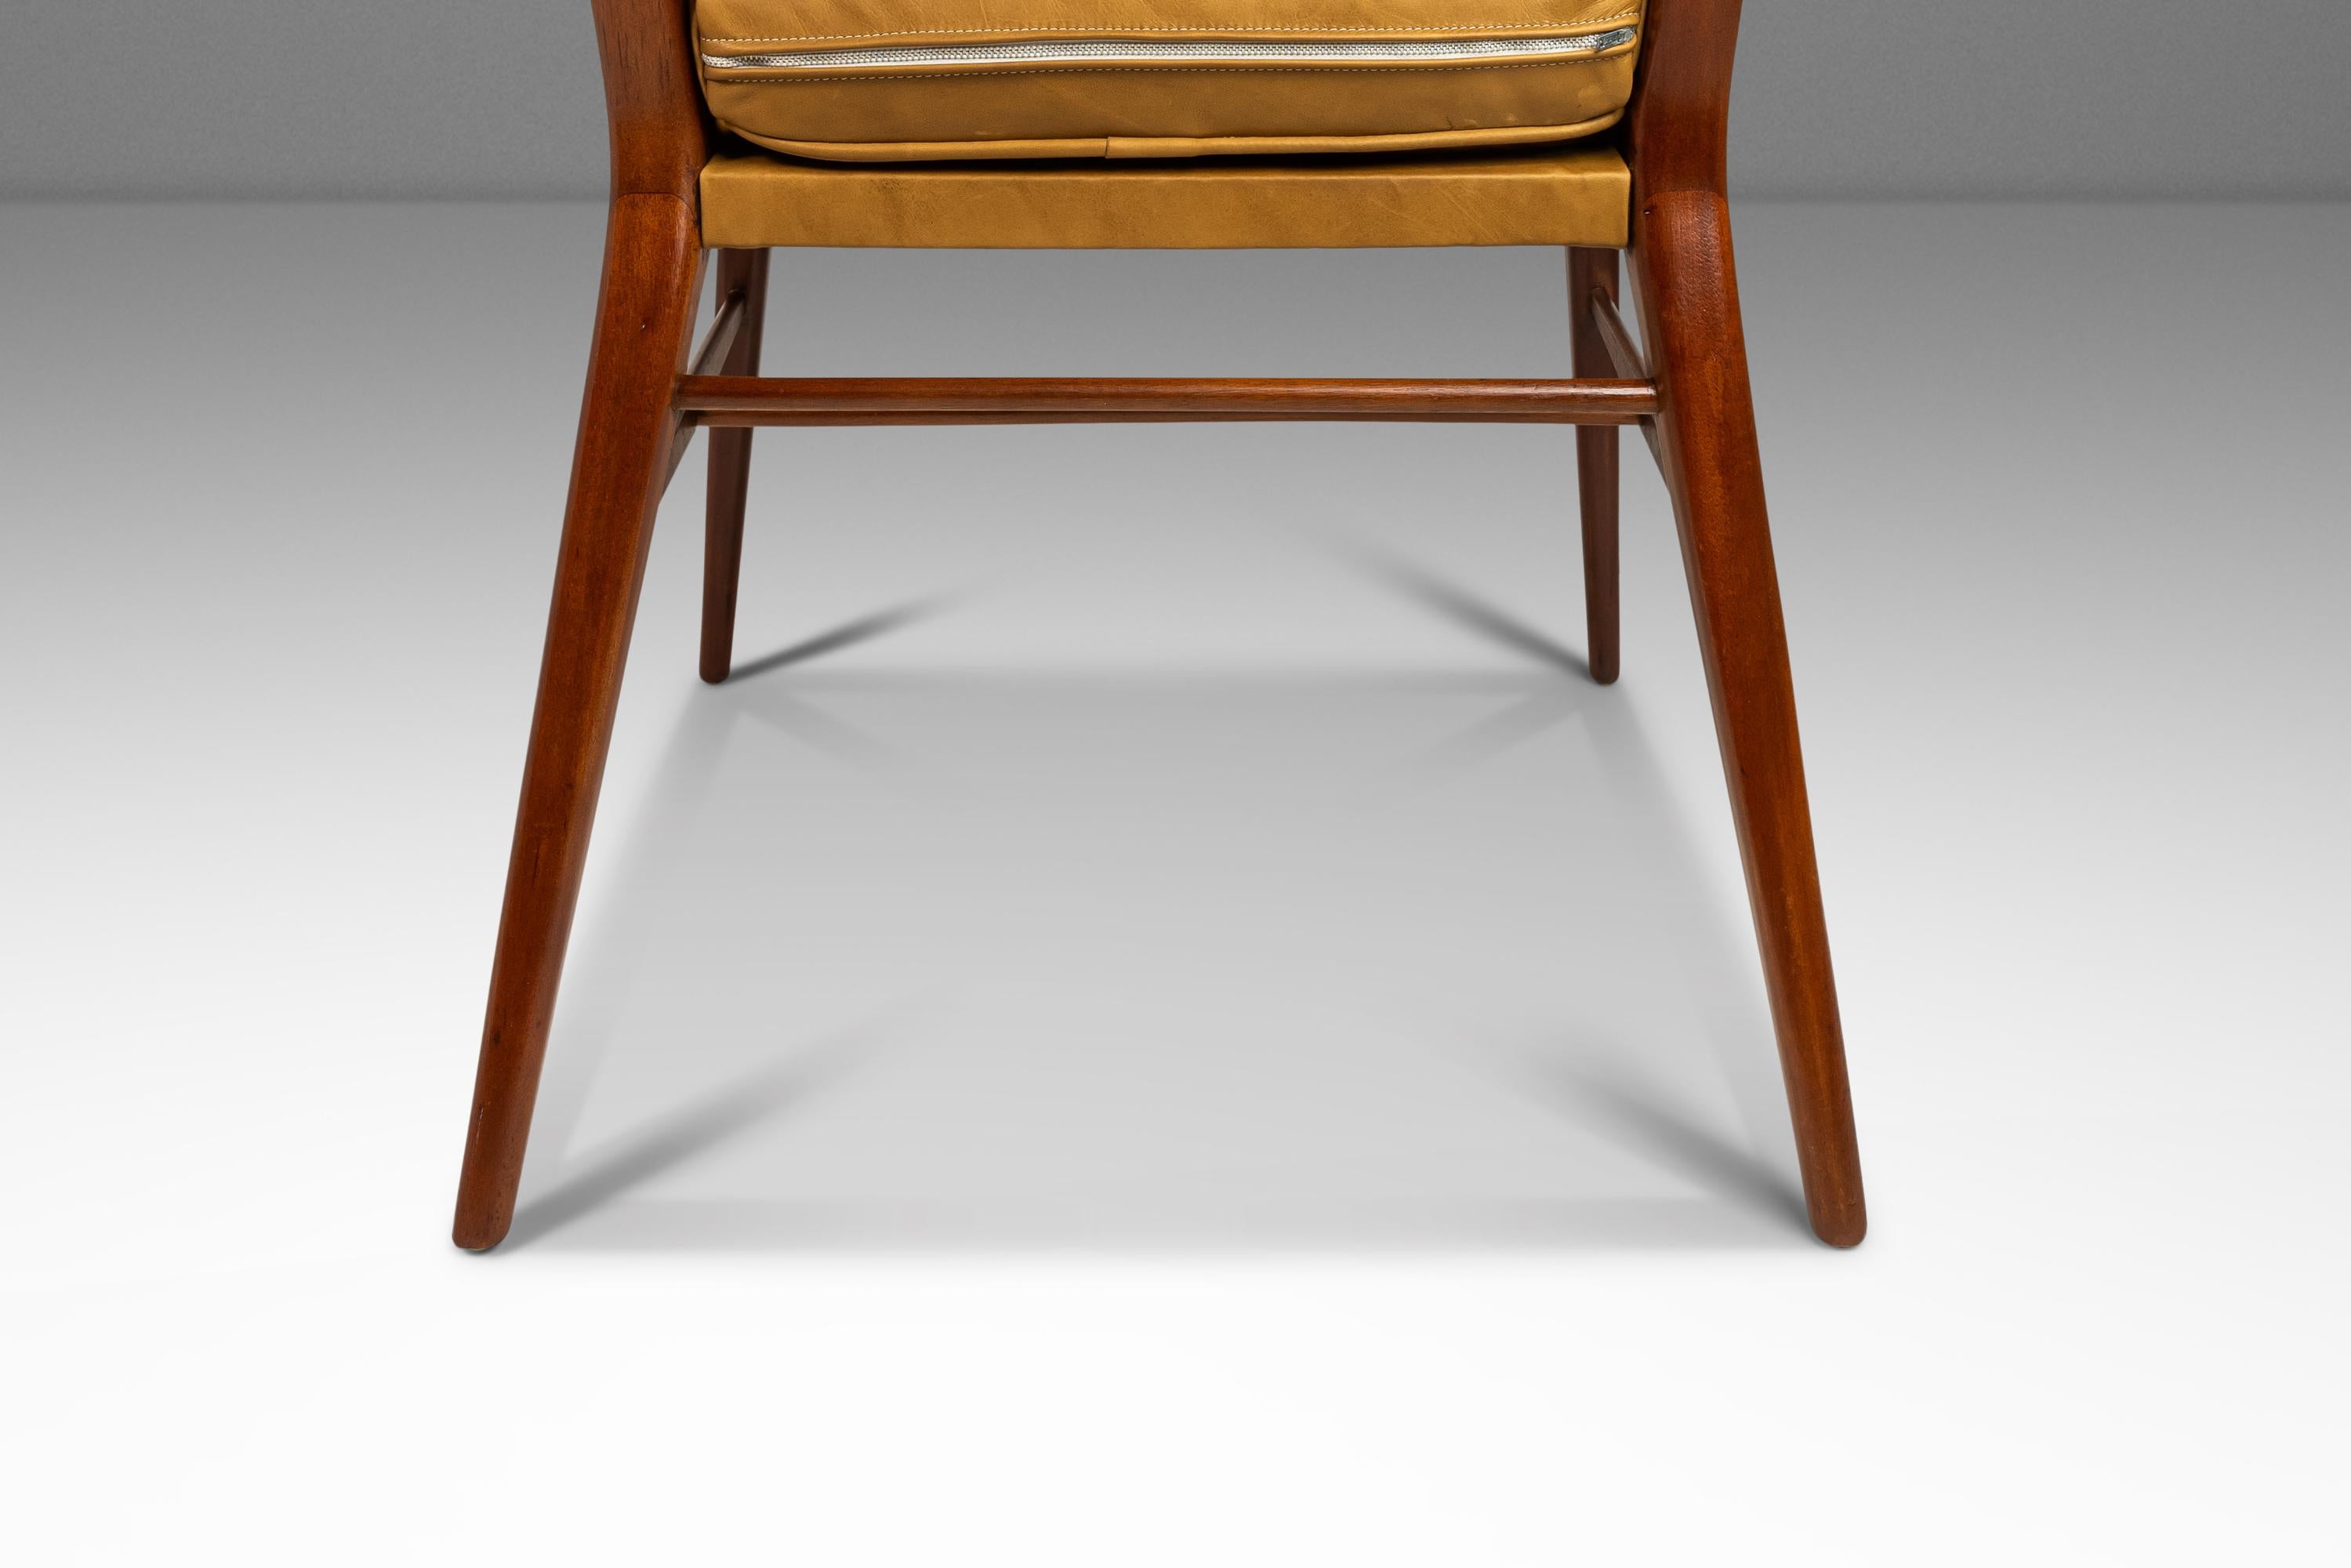 MCM Model 7001 Chair in Walnut by Paul McCobb for Directional, USA, c. 1950s For Sale 3